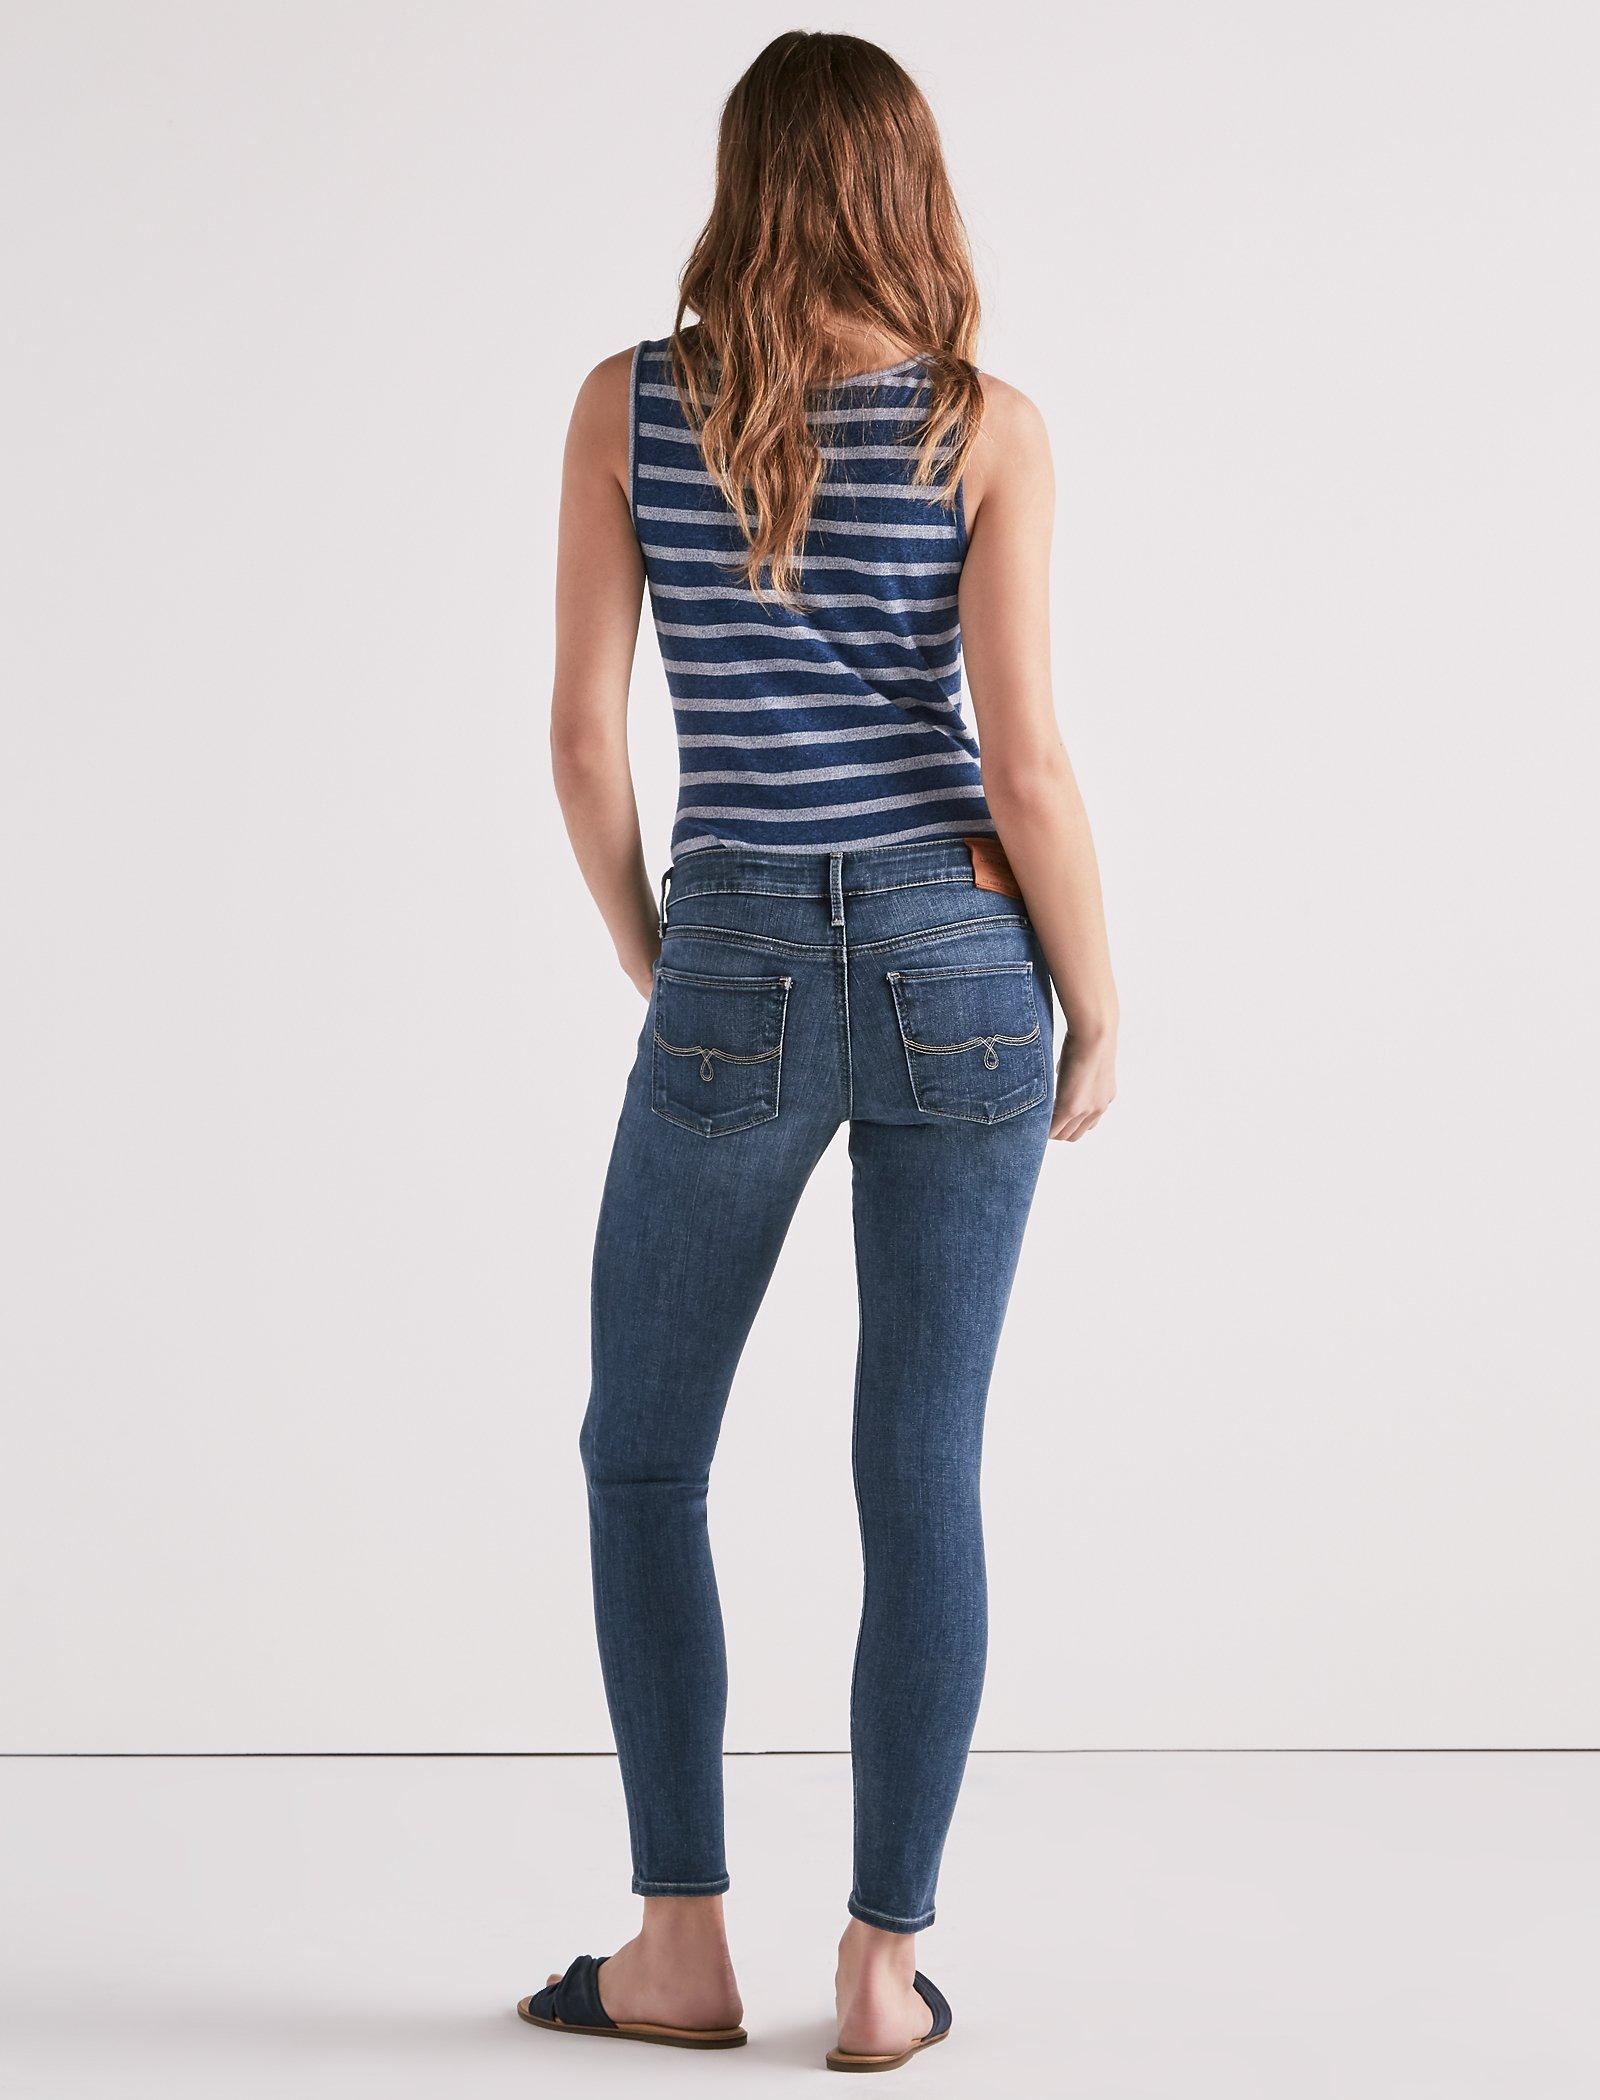 LOLITA MID RISE SKINNY JEAN IN HASLET | Lucky Brand